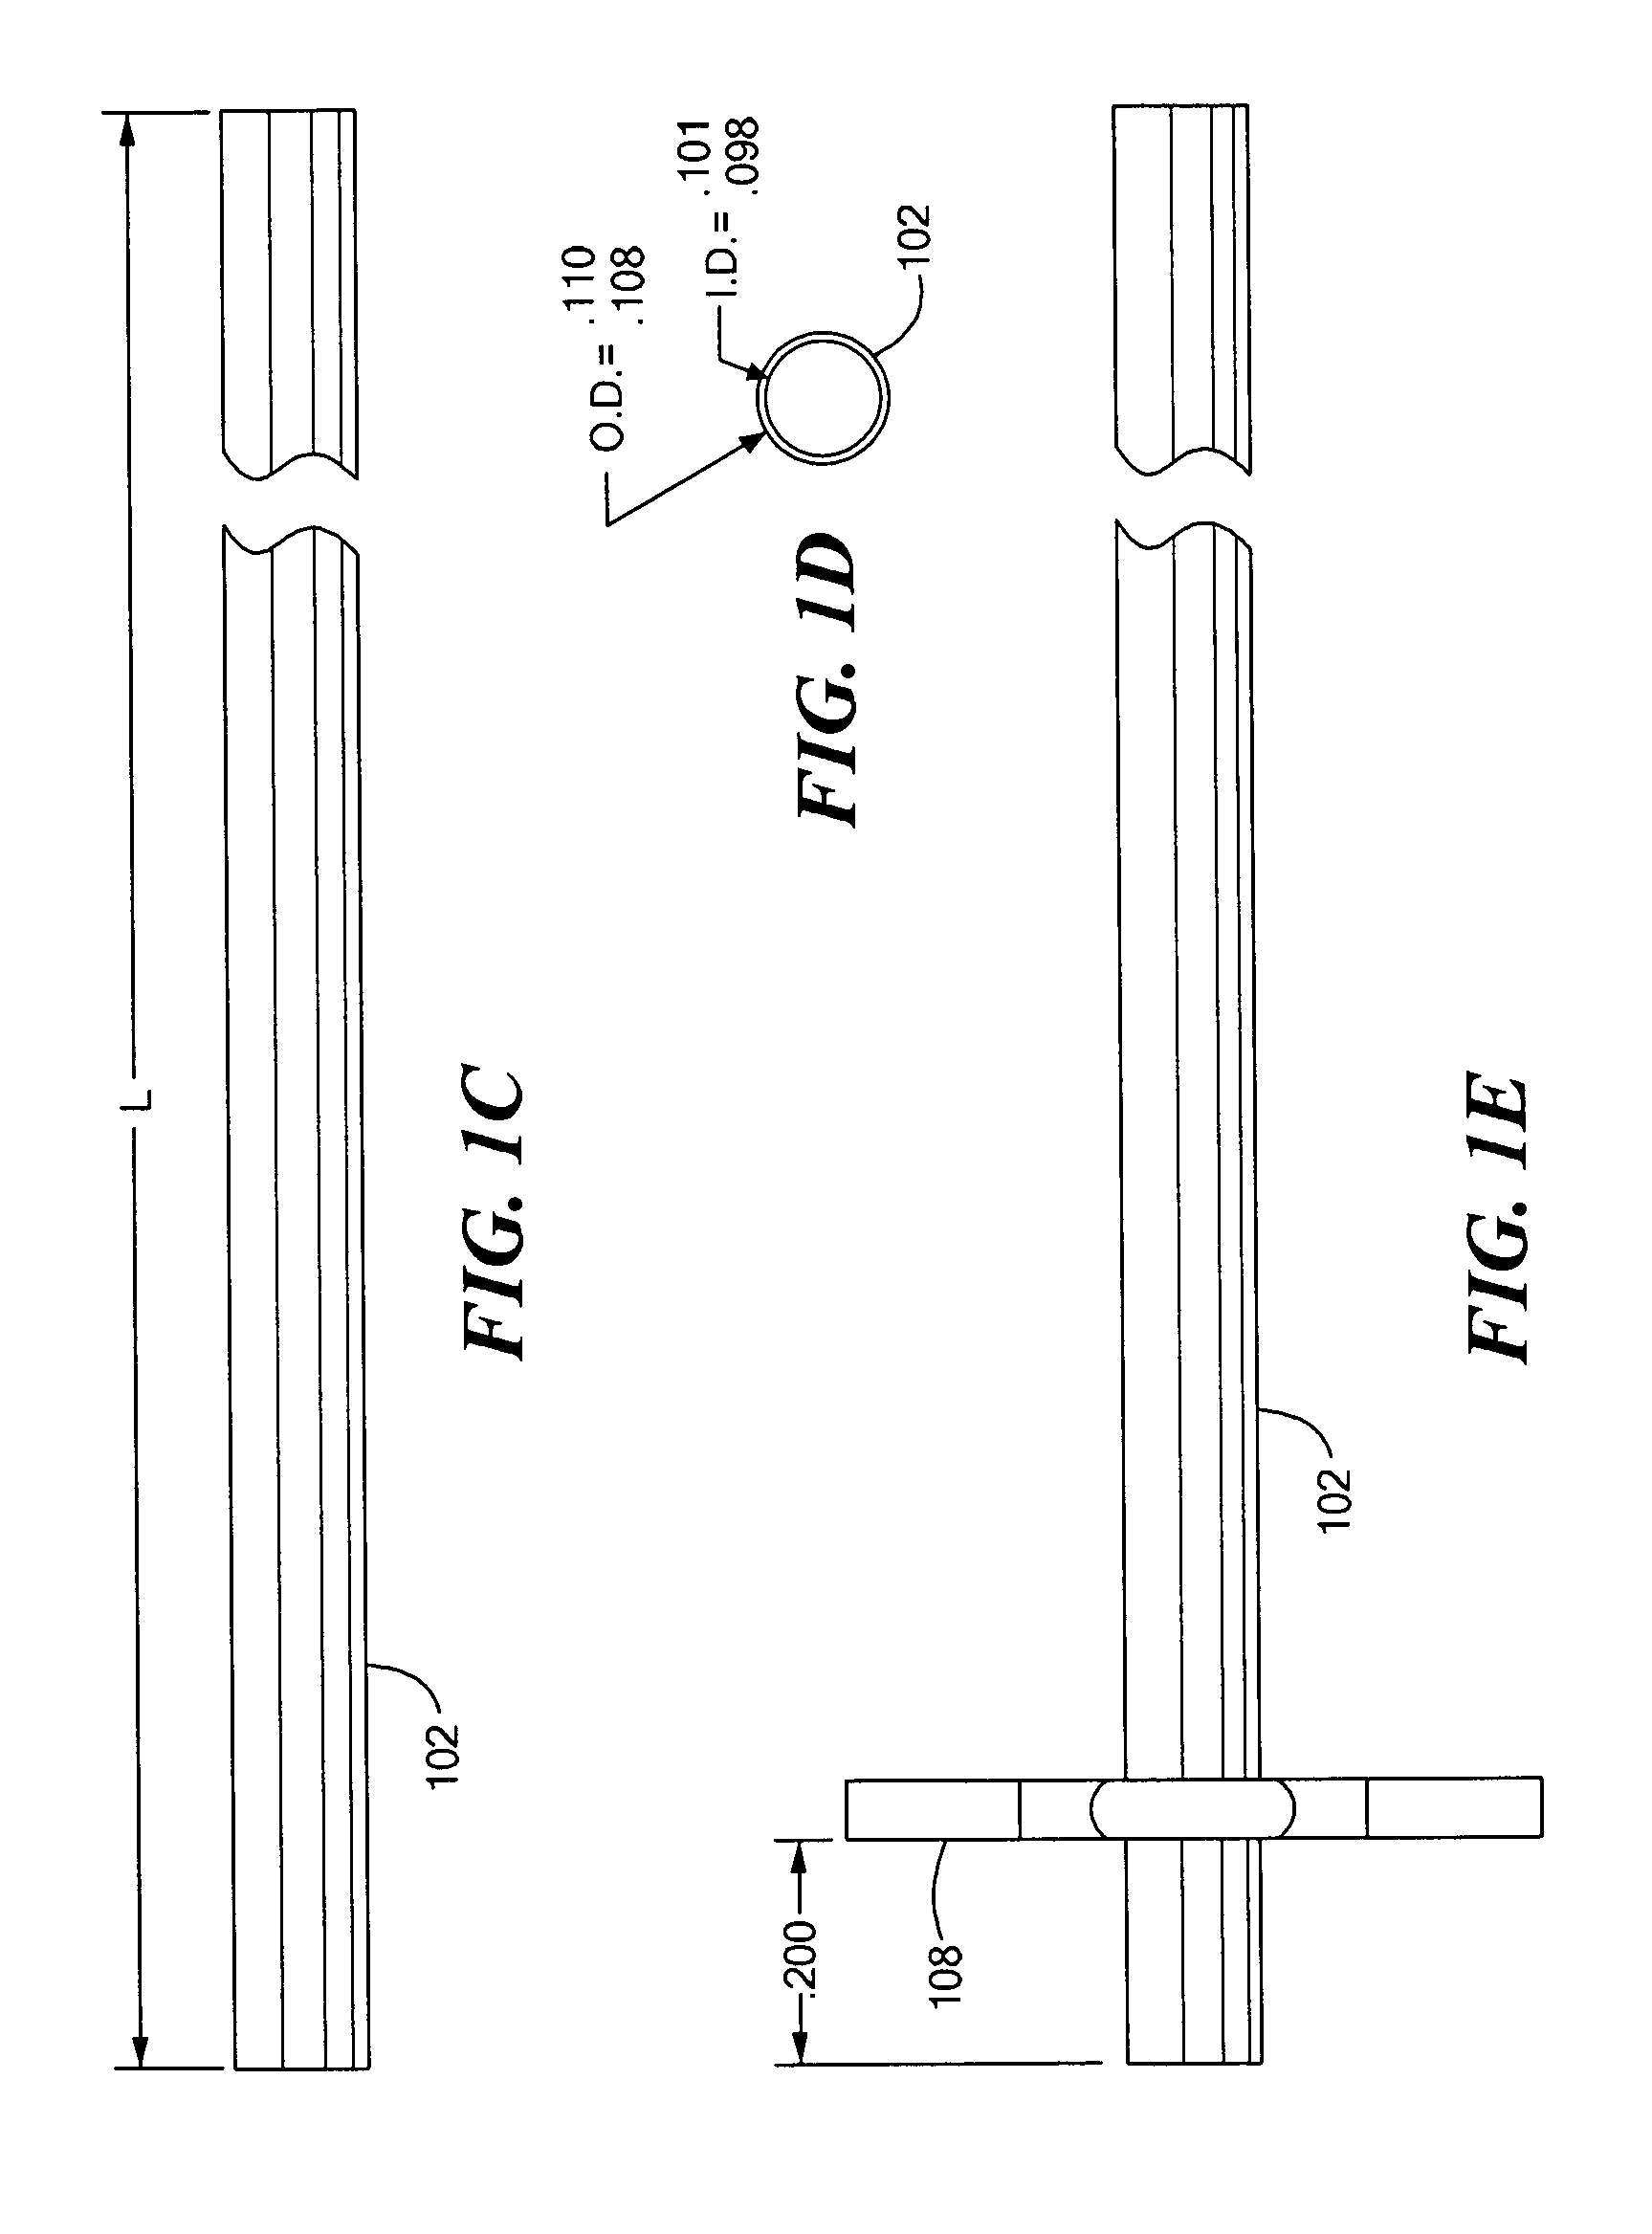 Tissue sample needle and method of using same